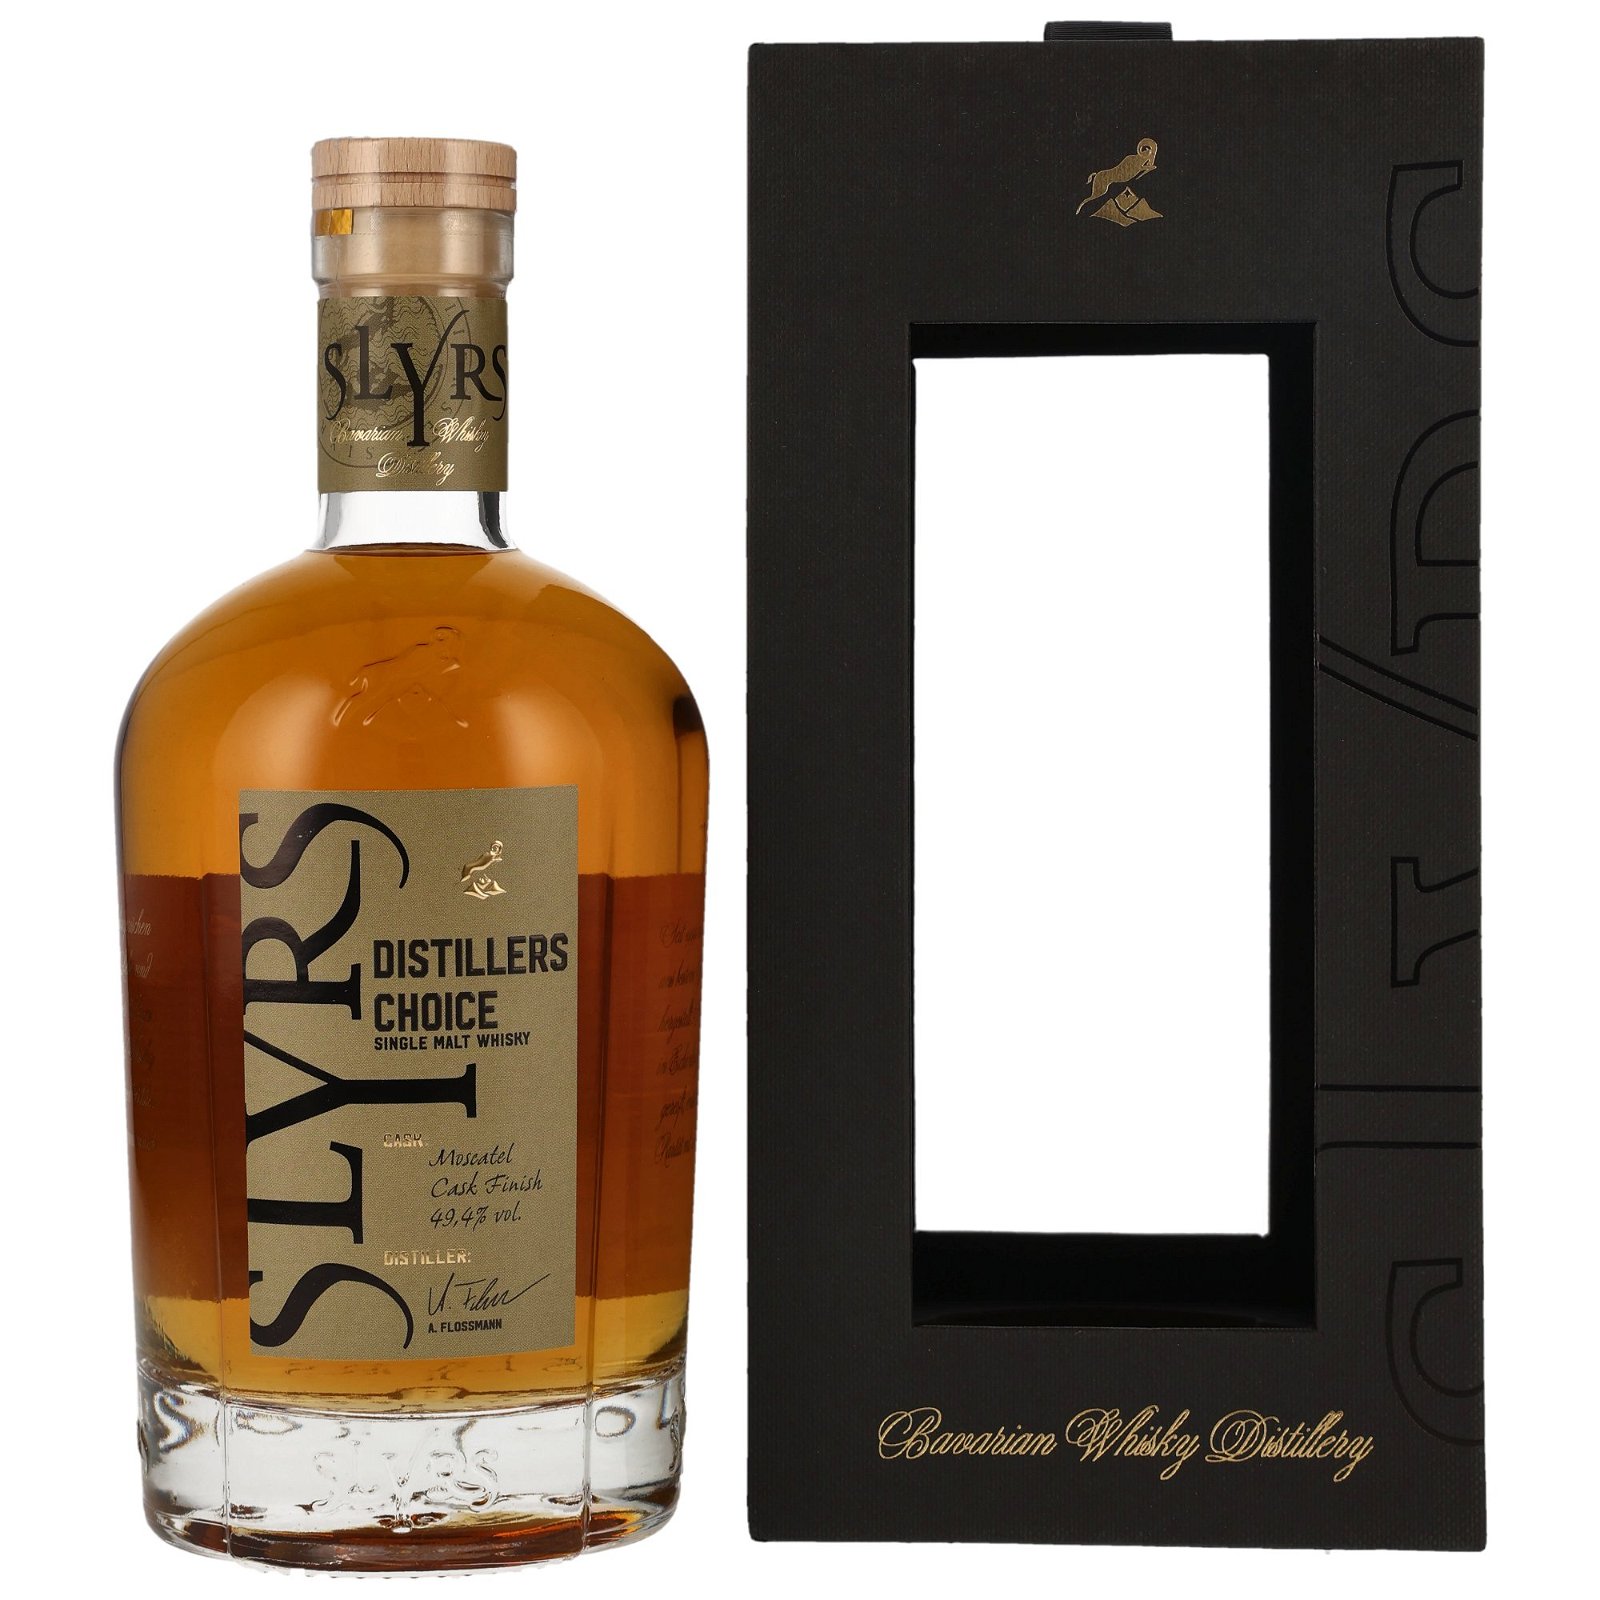 Slyrs Moscatel Cask Finish Distillers Choice